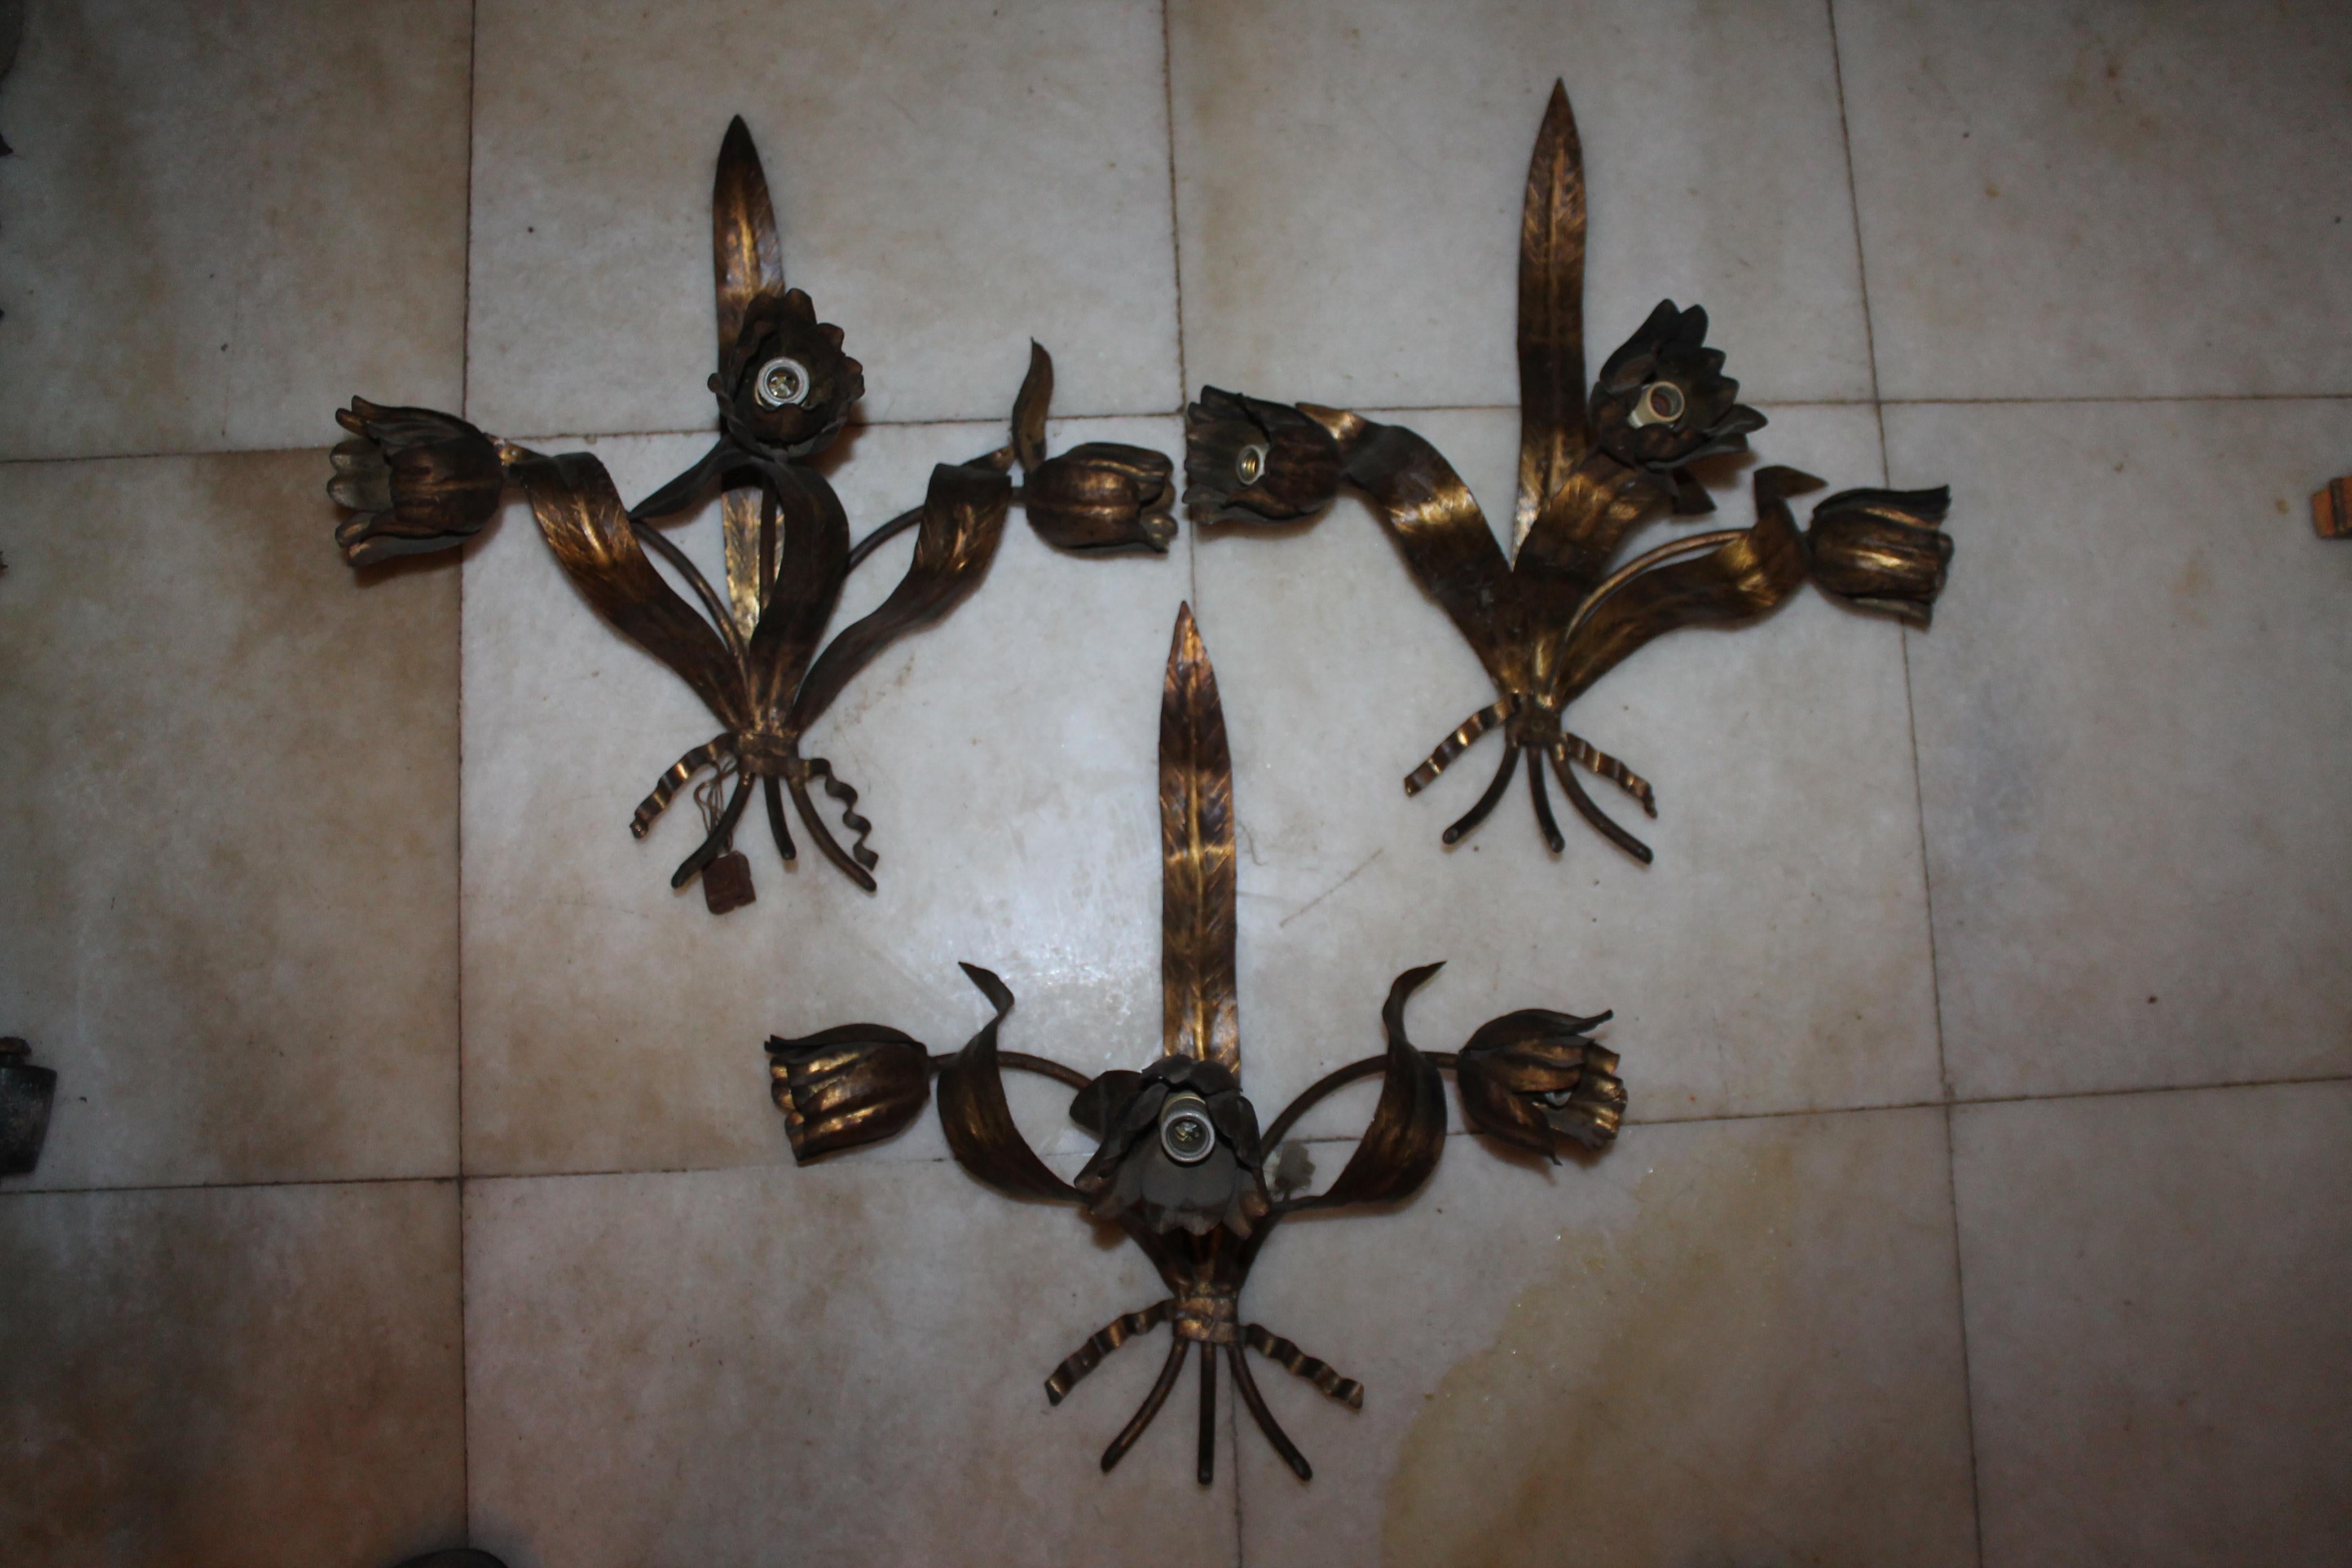 Set of 3 19thc French Louis XVI style Wall Sconces in a Distressed Gilt Metal In Good Condition For Sale In Opa Locka, FL